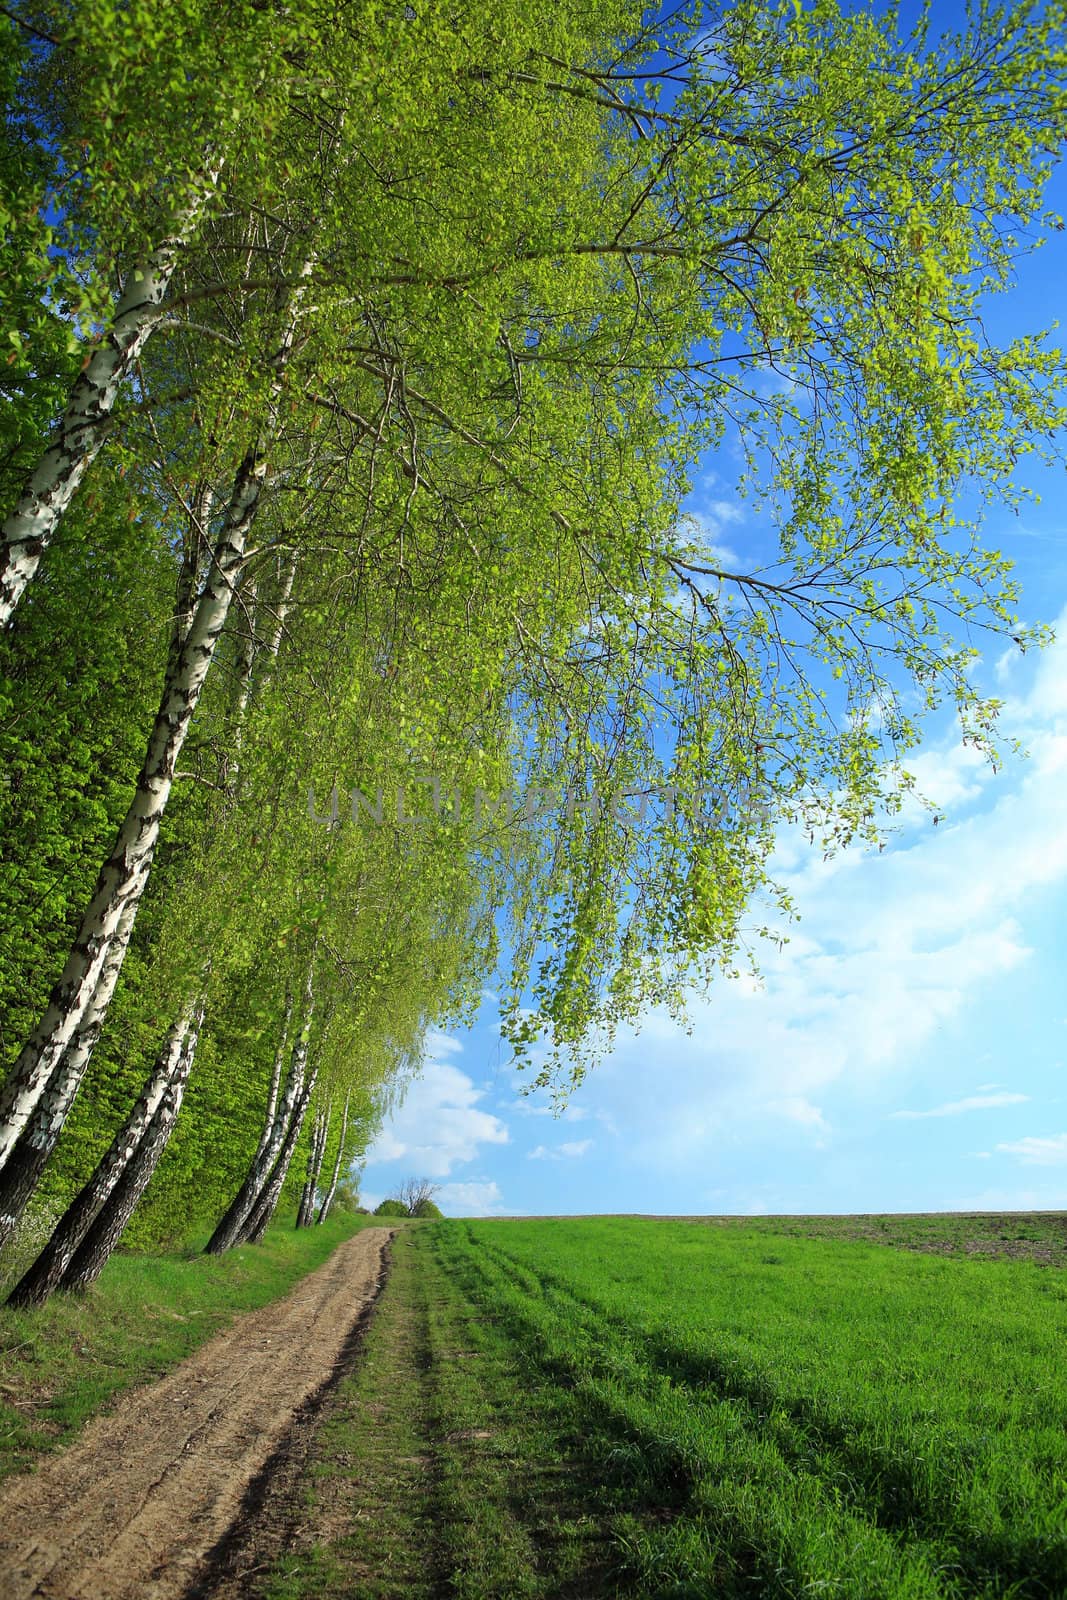 A road in a field and birches along it